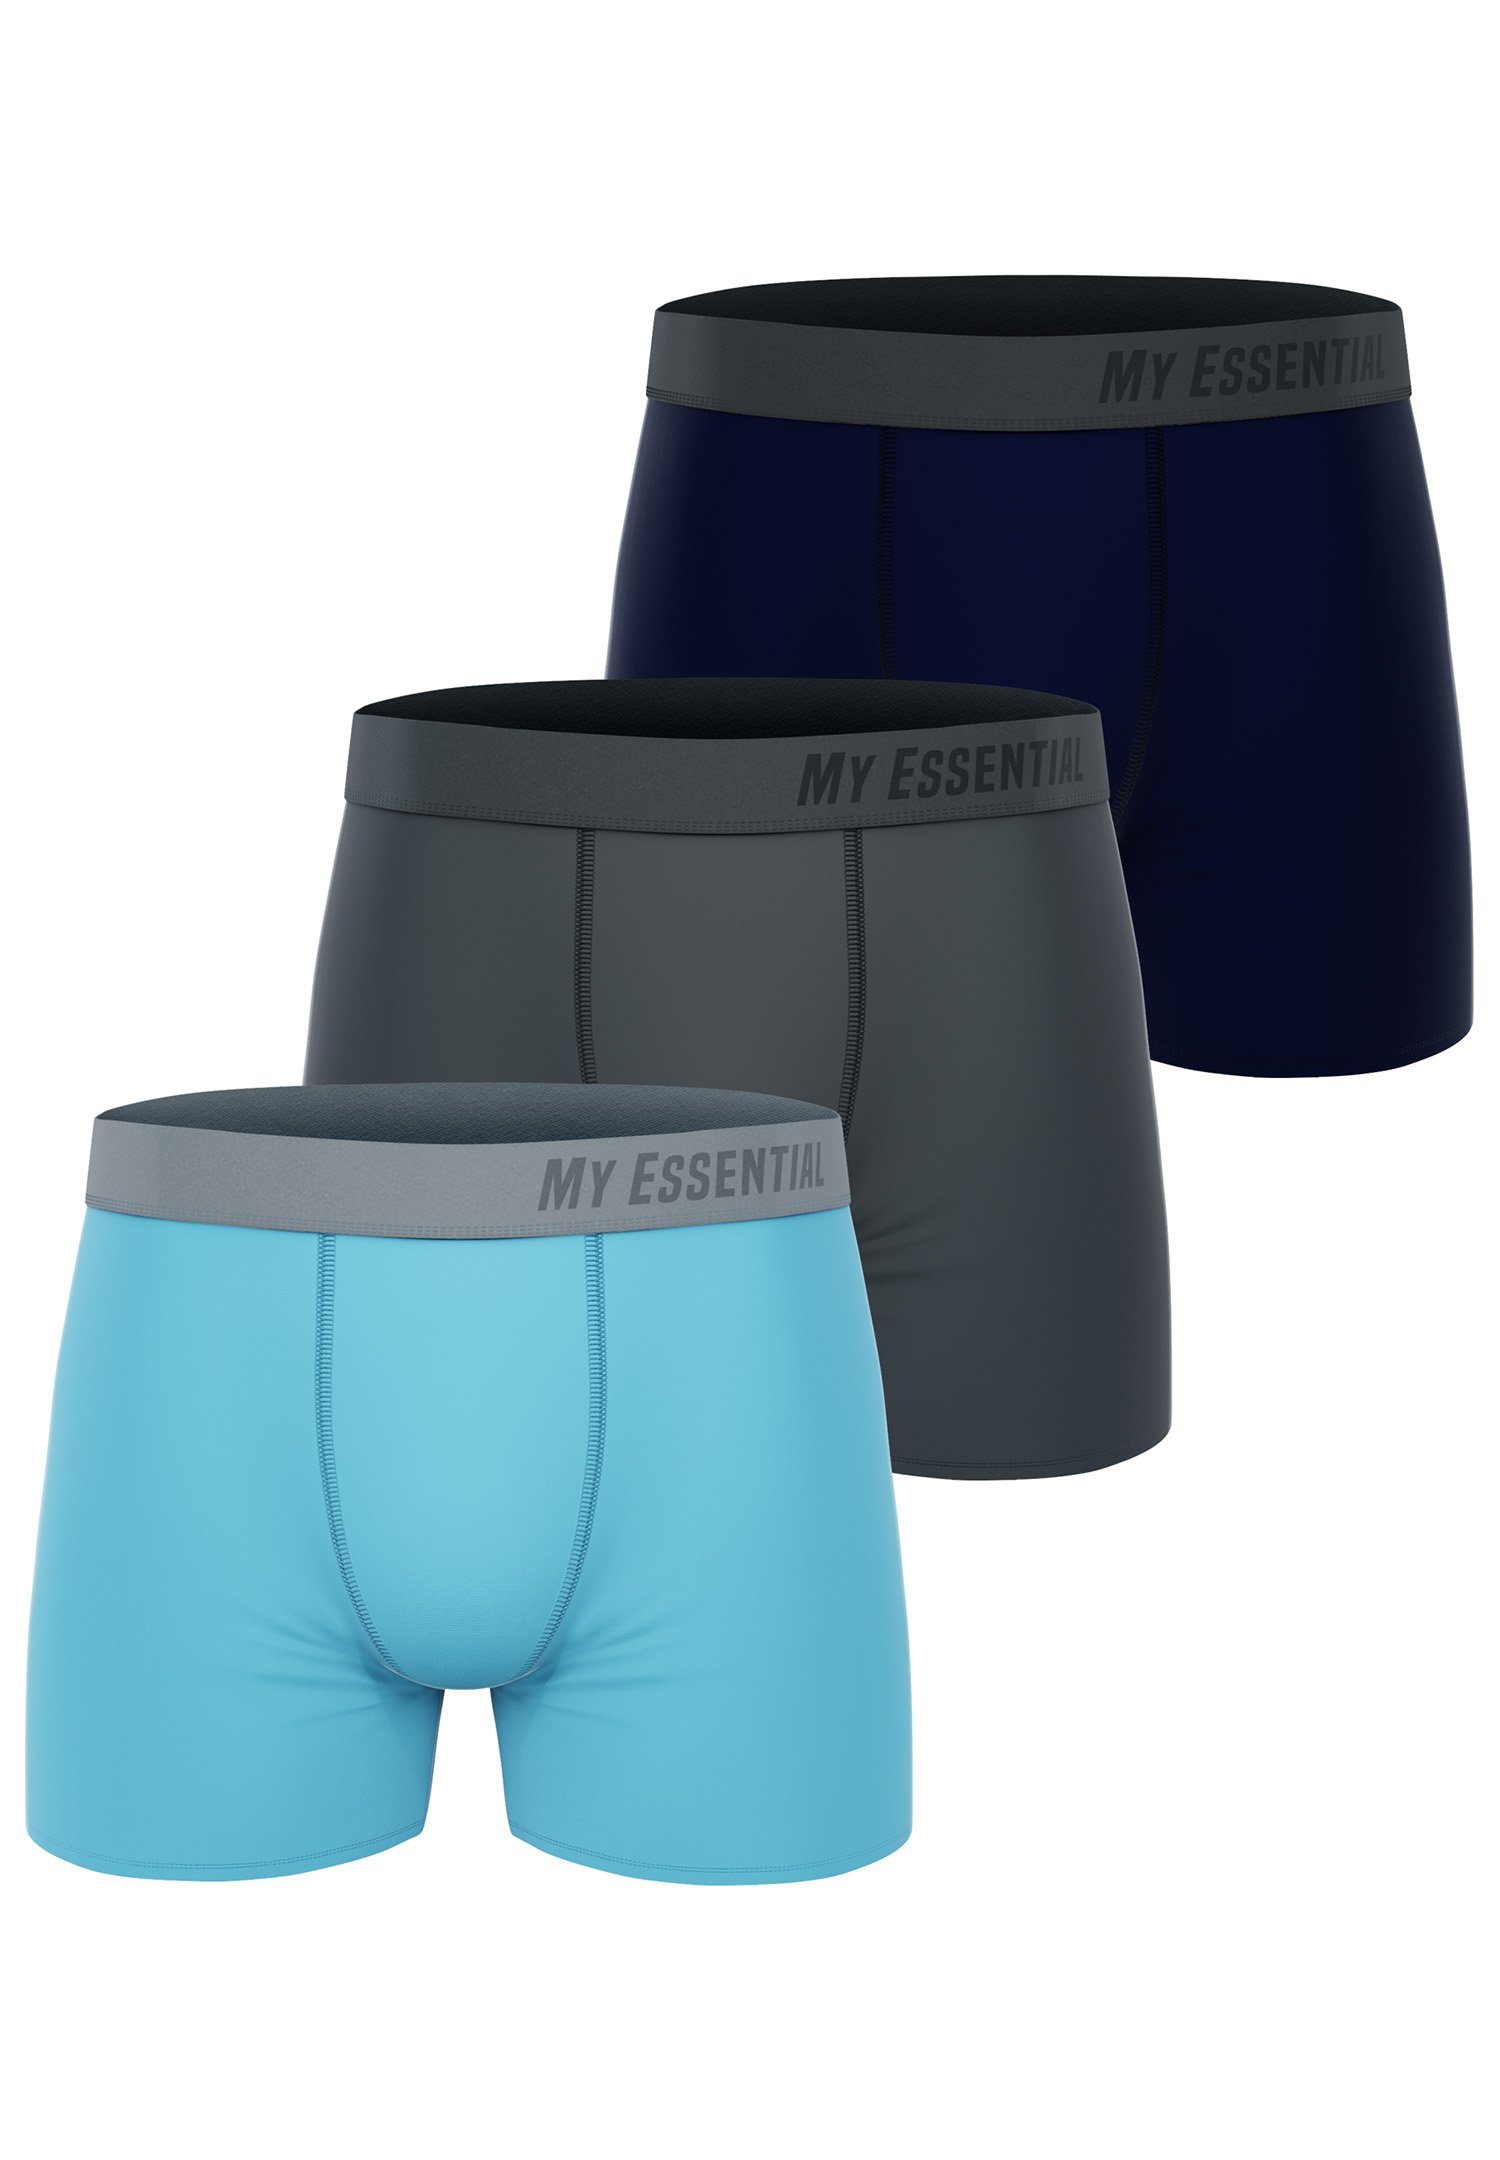 Bio 3 Cotton Boxers (Spar-Pack, 3er-Pack) Essential My Blue Pack My Essential Boxershorts 3-St., Clothing